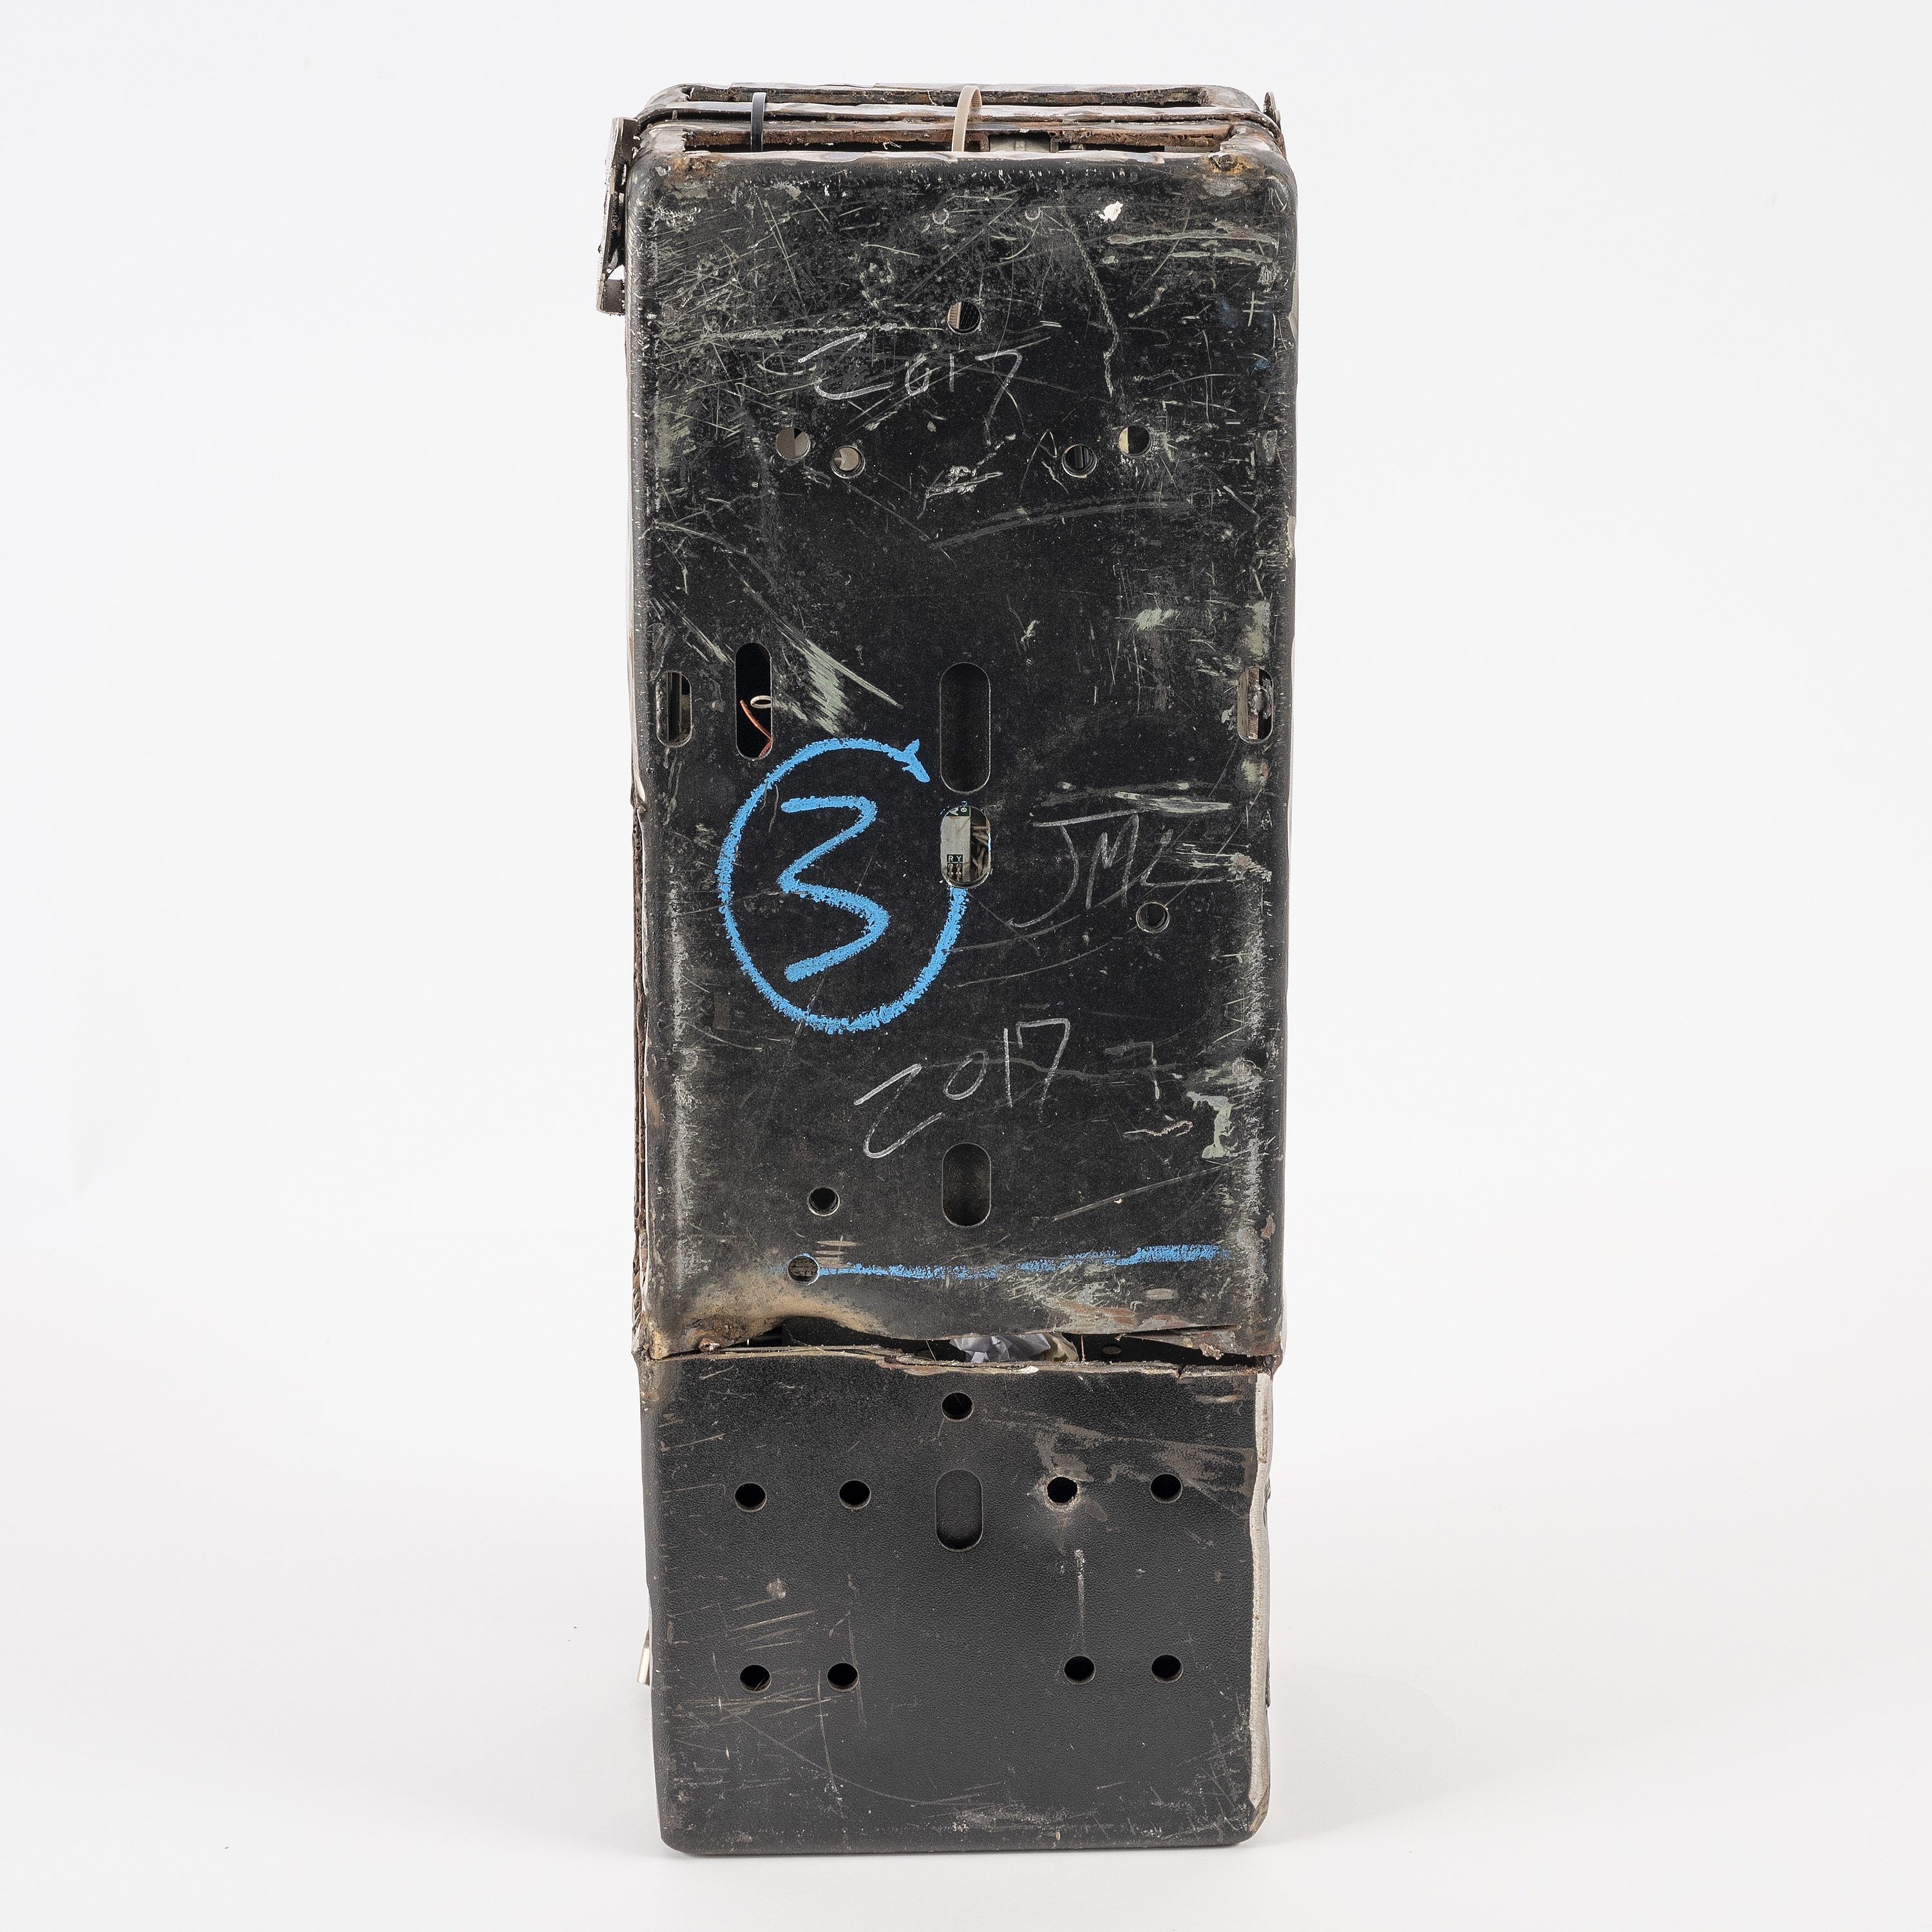 Artwork by Jason Matthew Lee, BFP:time791-7414, Made of hardrive magnets, animal trap, on cut and welded payphones